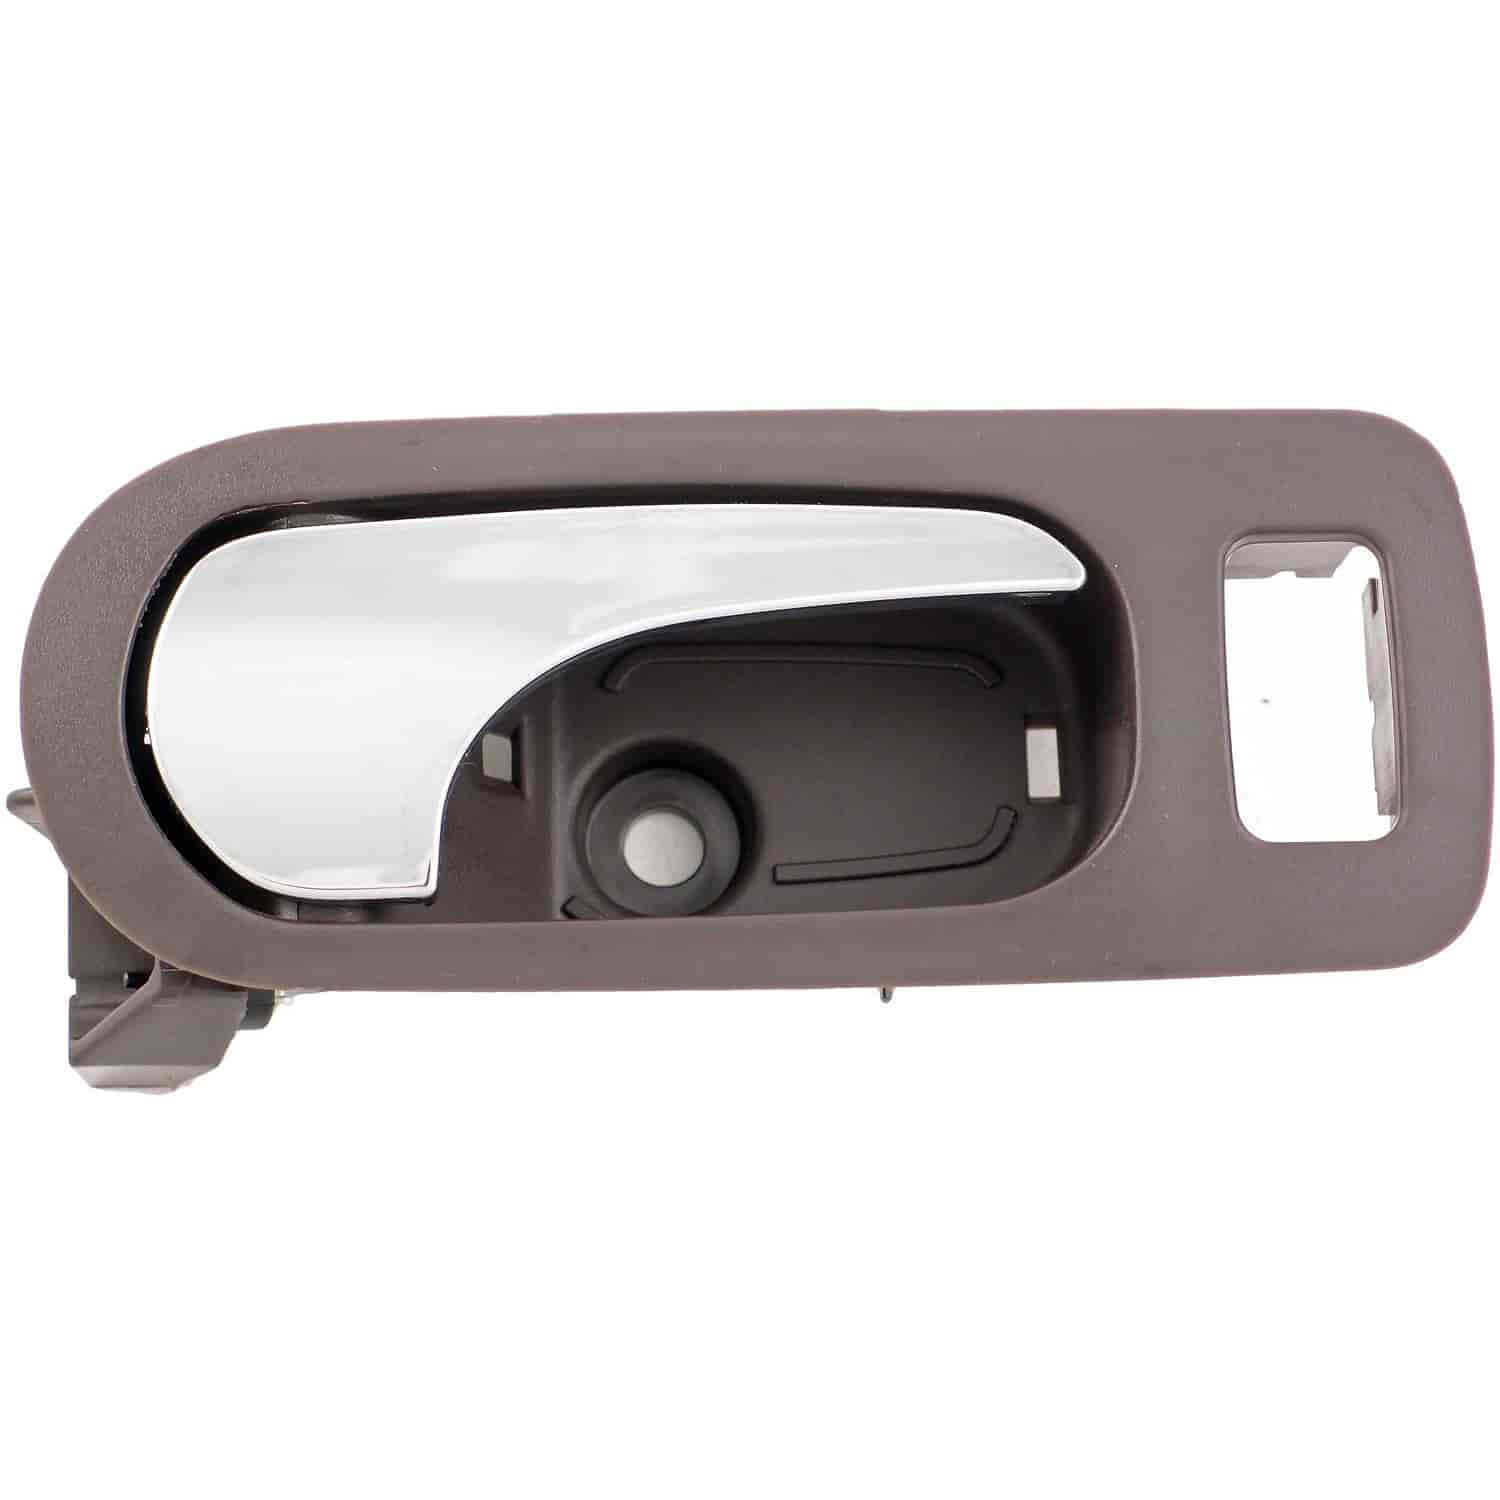 Interior Door Handle - Front Right - Chrome Lever+Brown Housing Cocoa